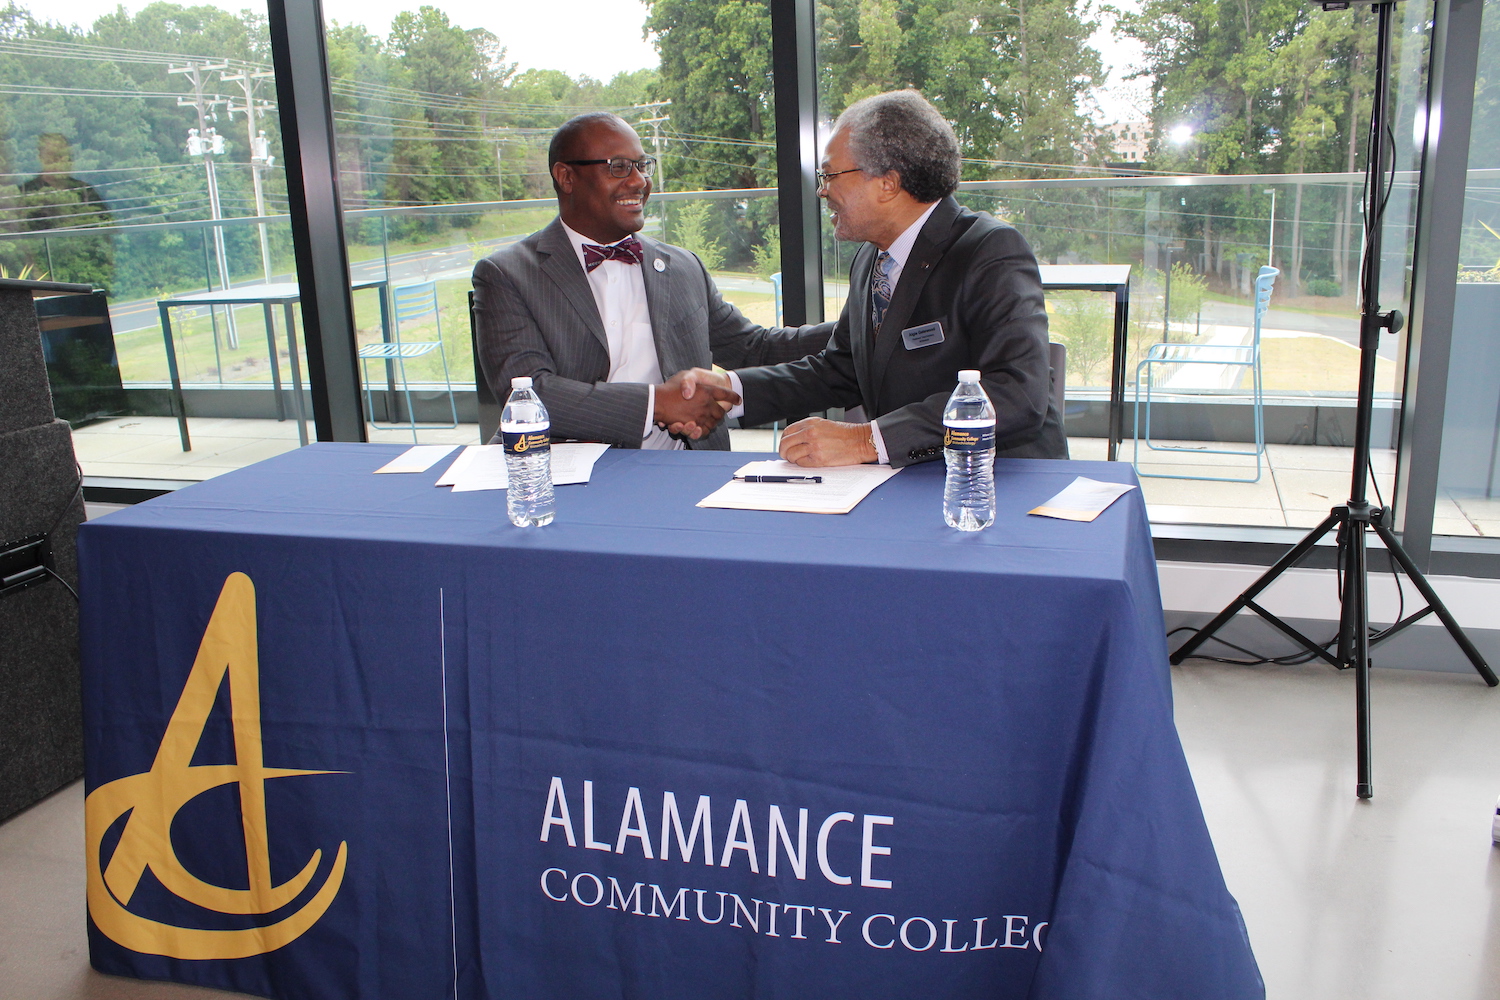 Provost Jackson and Dr. Gatewood shaking hands